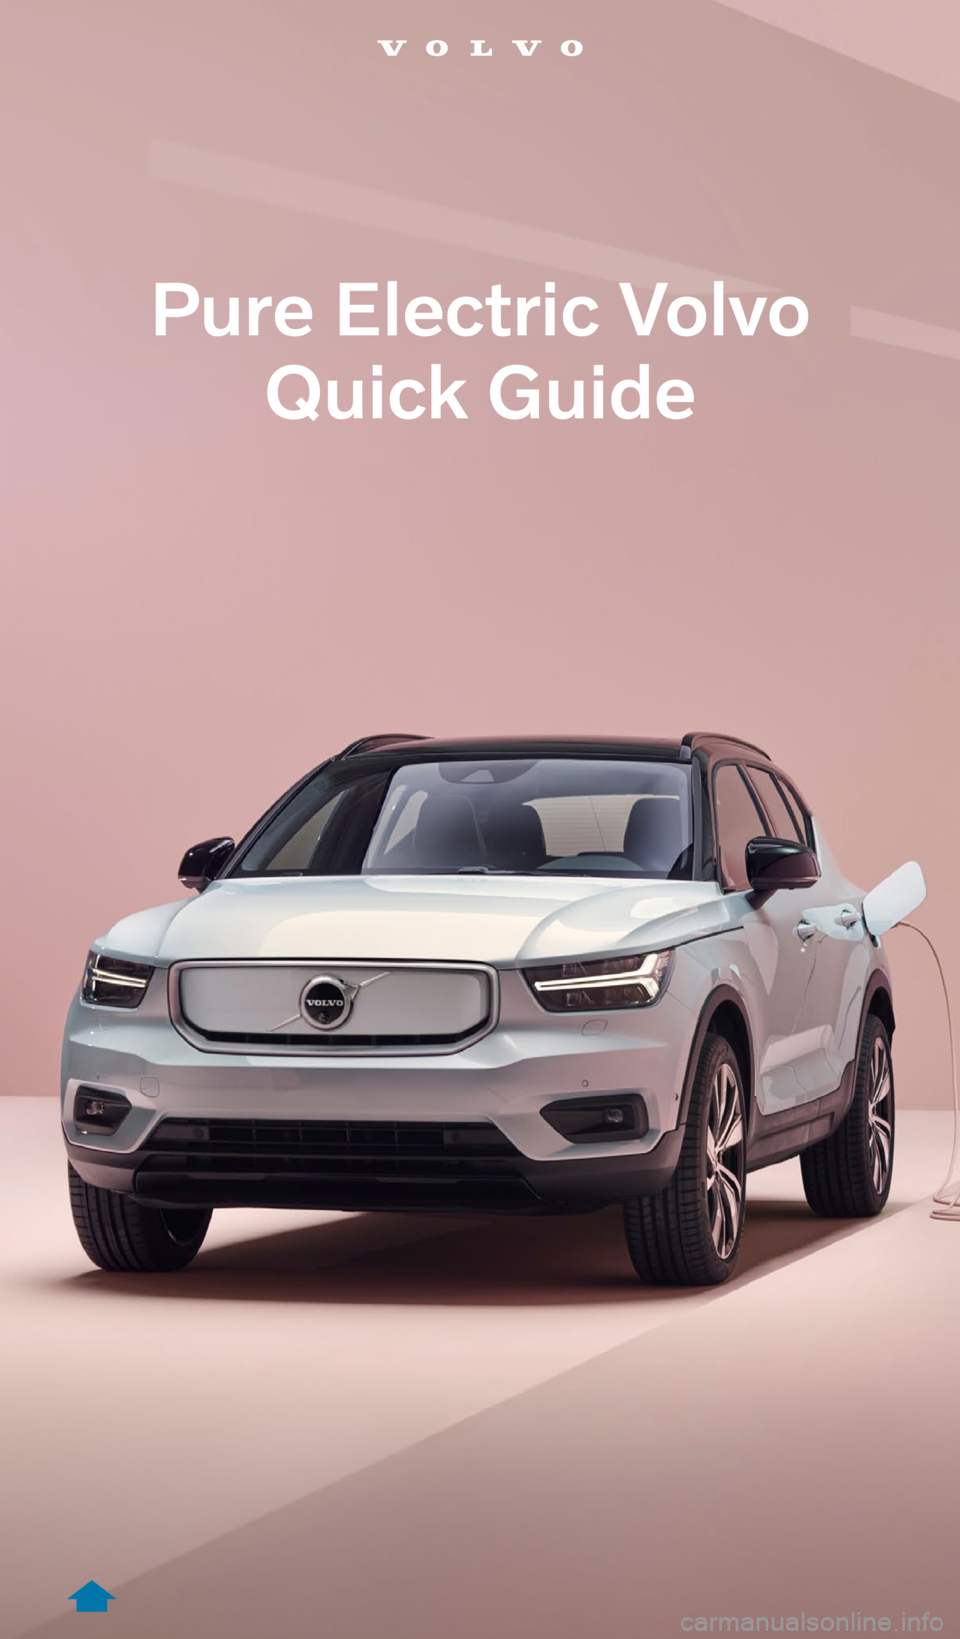 VOLVO XC40 RECHARGE PURE ELECTRIC 2021  Quick Guide Pure Electric Volvo  
Quick Guide 